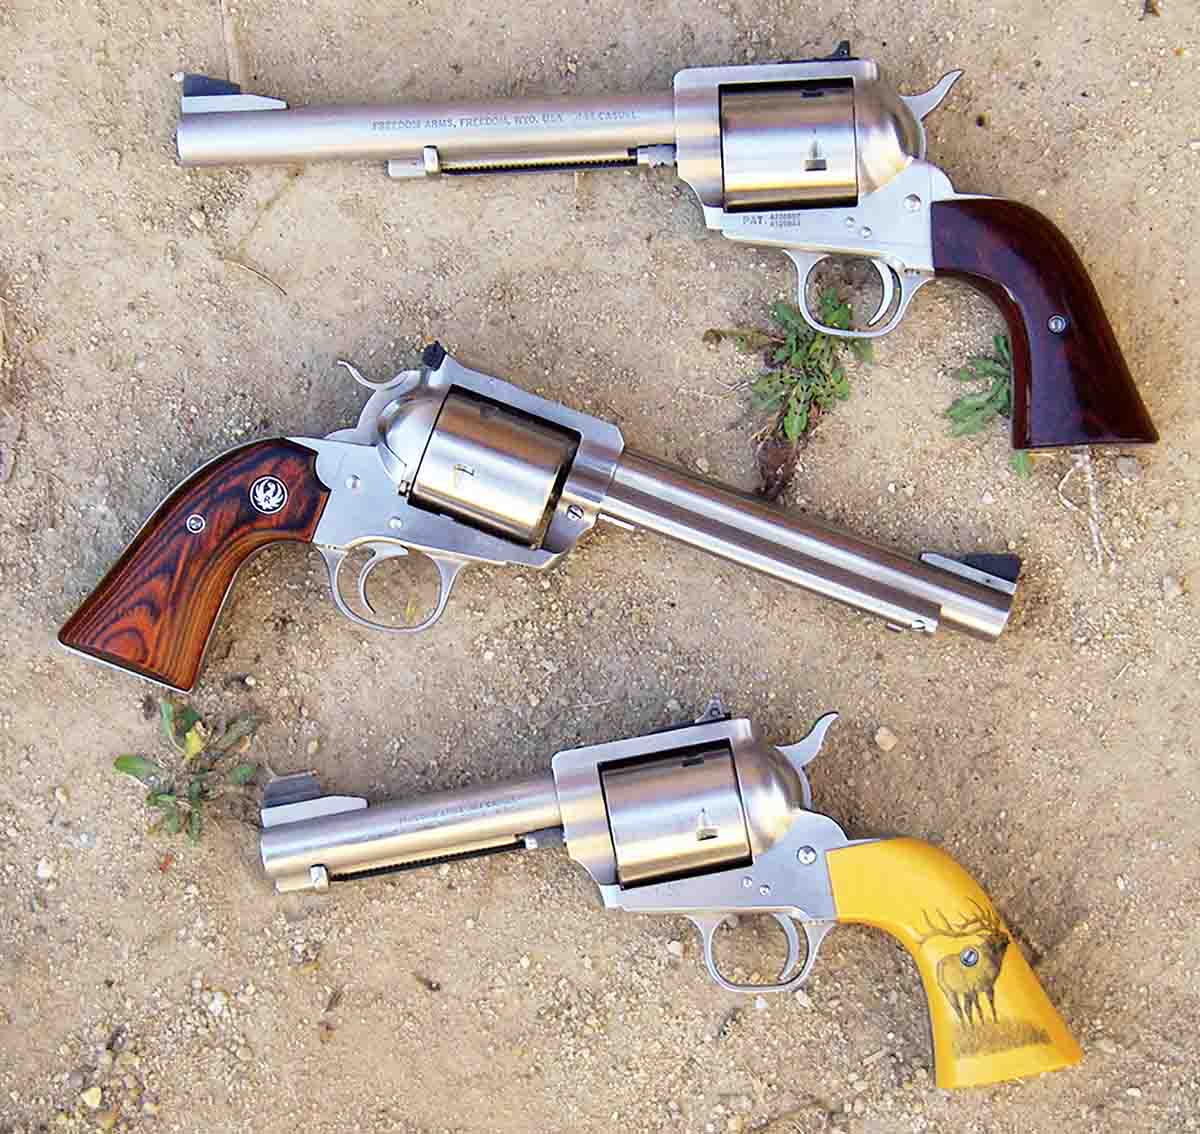 Typical revolvers chambered for the .454 Casull include (top to bottom) a Freedom Arms Model 83 with a 7½-inch barrel, a Ruger New Model Super Blackhawk Bisley with a 6½-inch barrel and a custom Freedom Arms Model 83 with a 4¾-inch barrel.